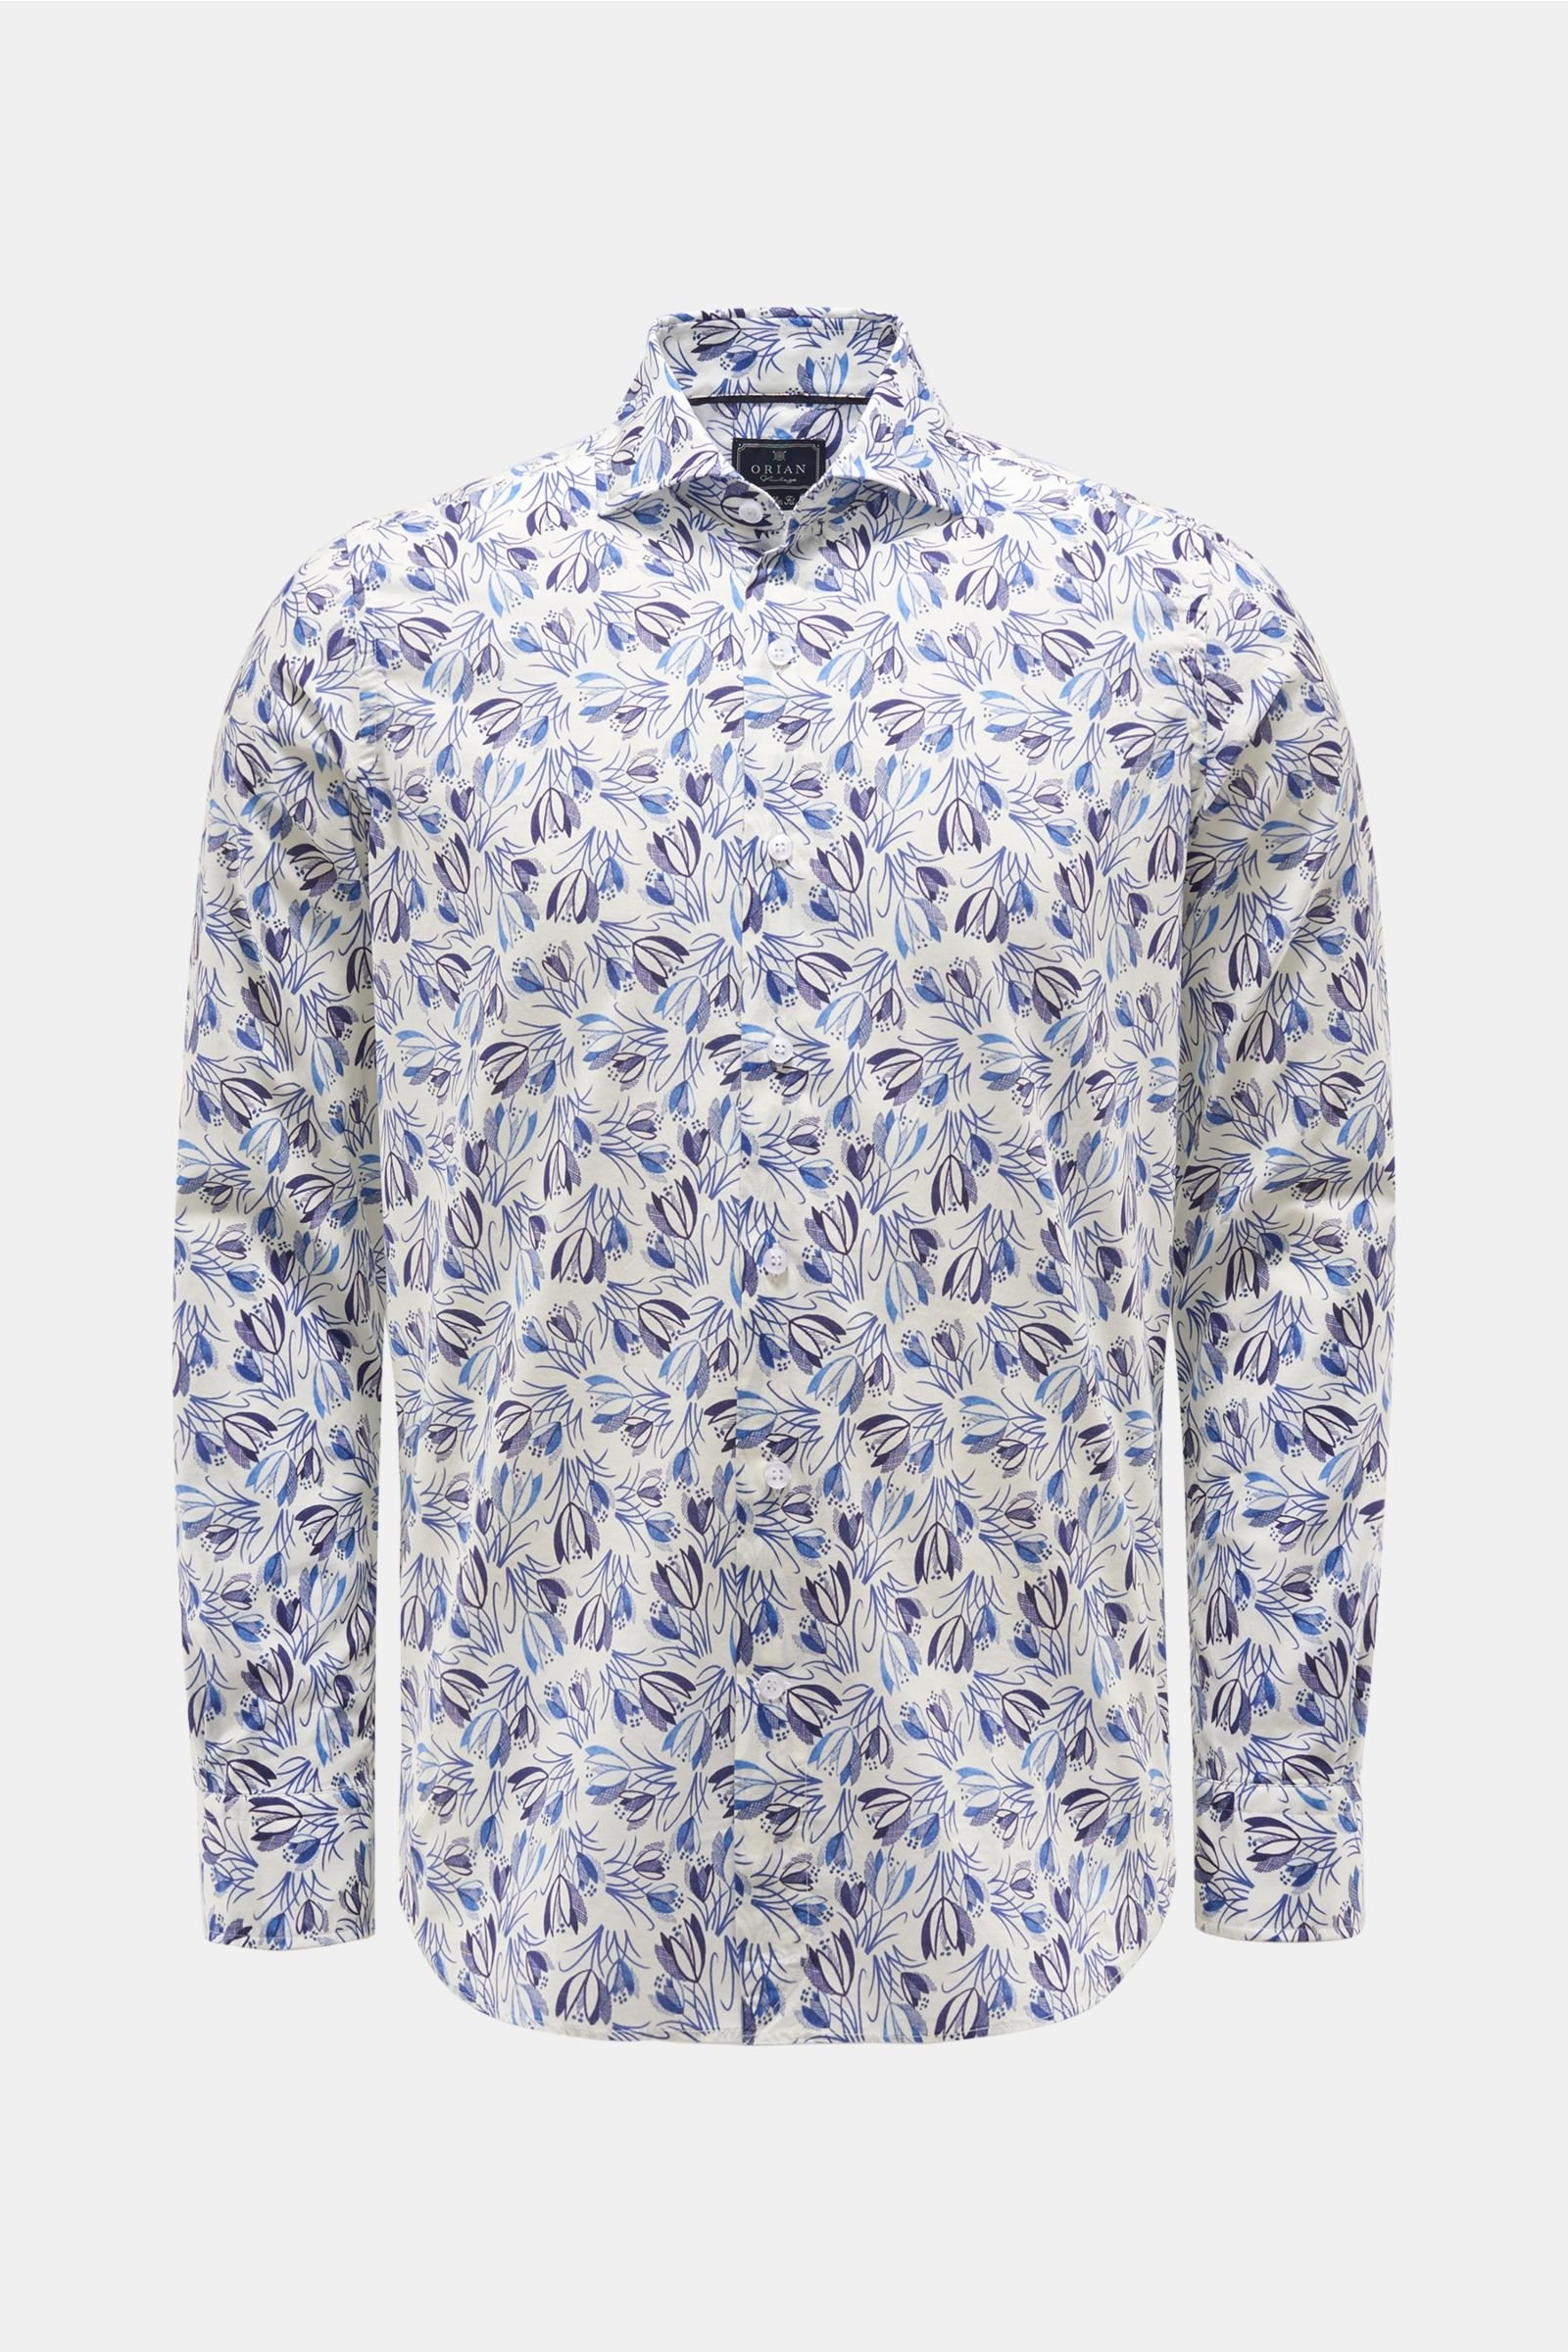 Casual shirt shark collar navy/white patterned